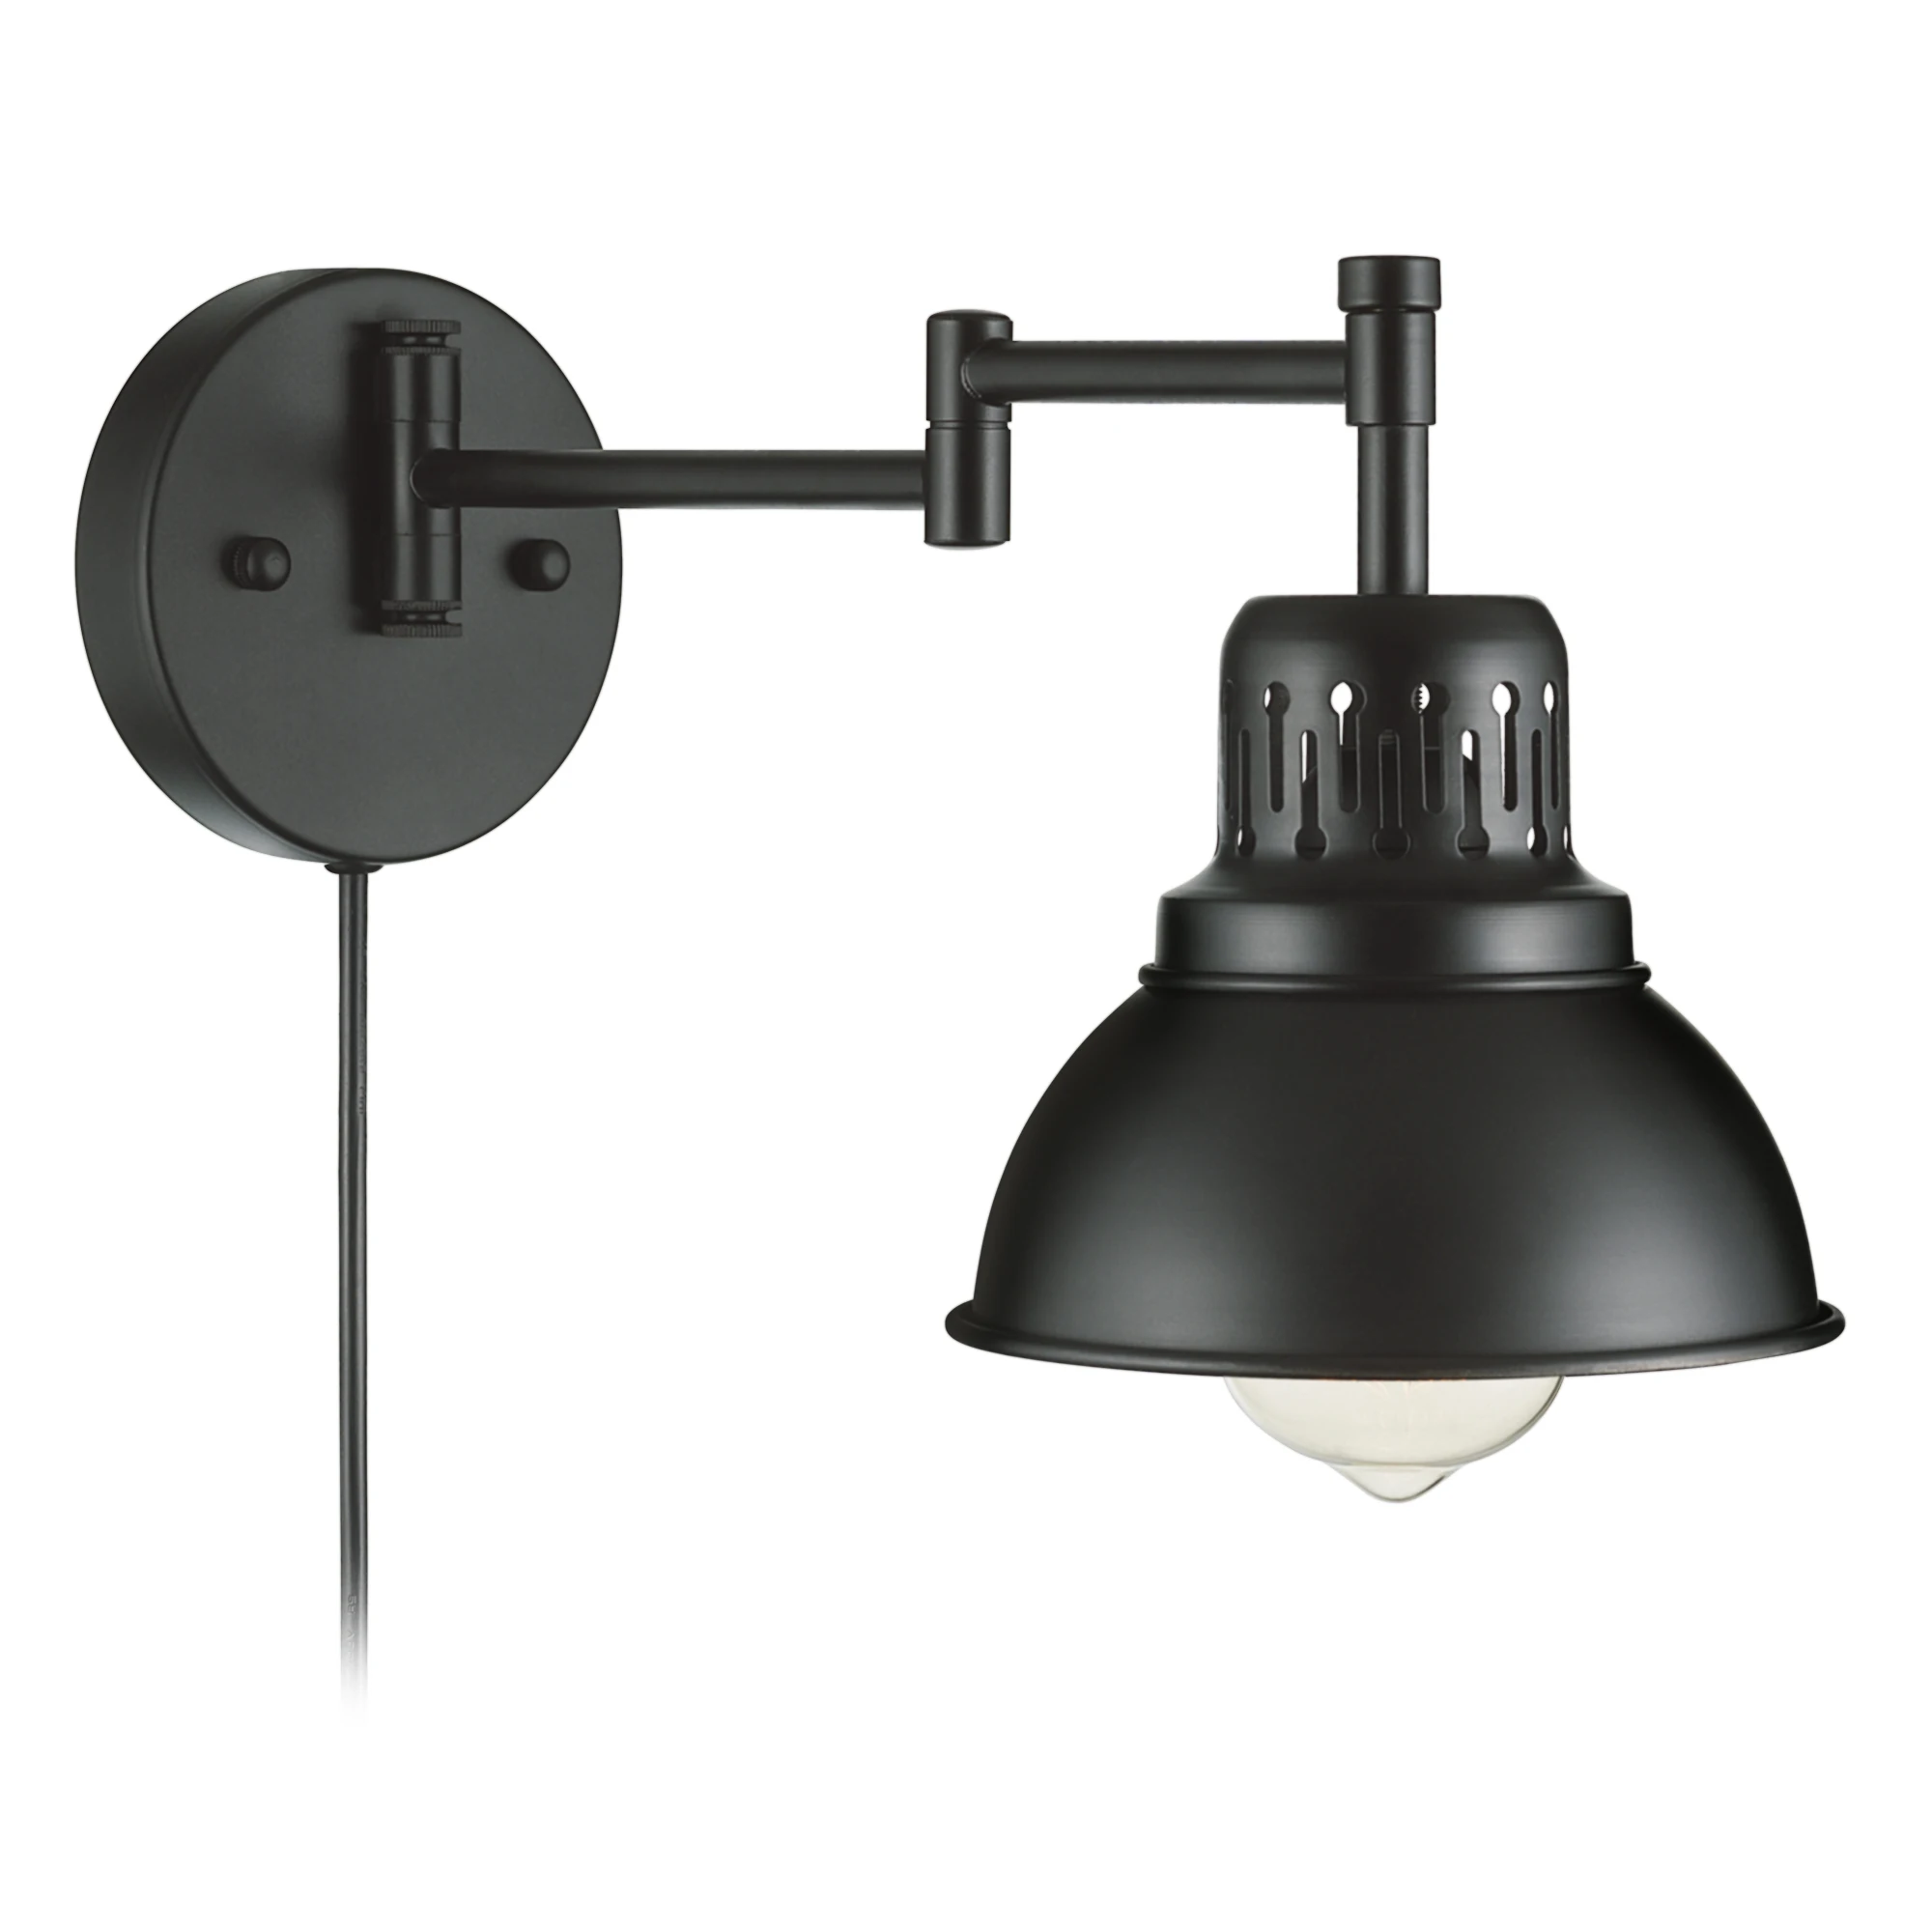 Details about   Set of 2 Swing Arm Wall Sconce Wall Lamp Industrial Black Plug in Cord Light 